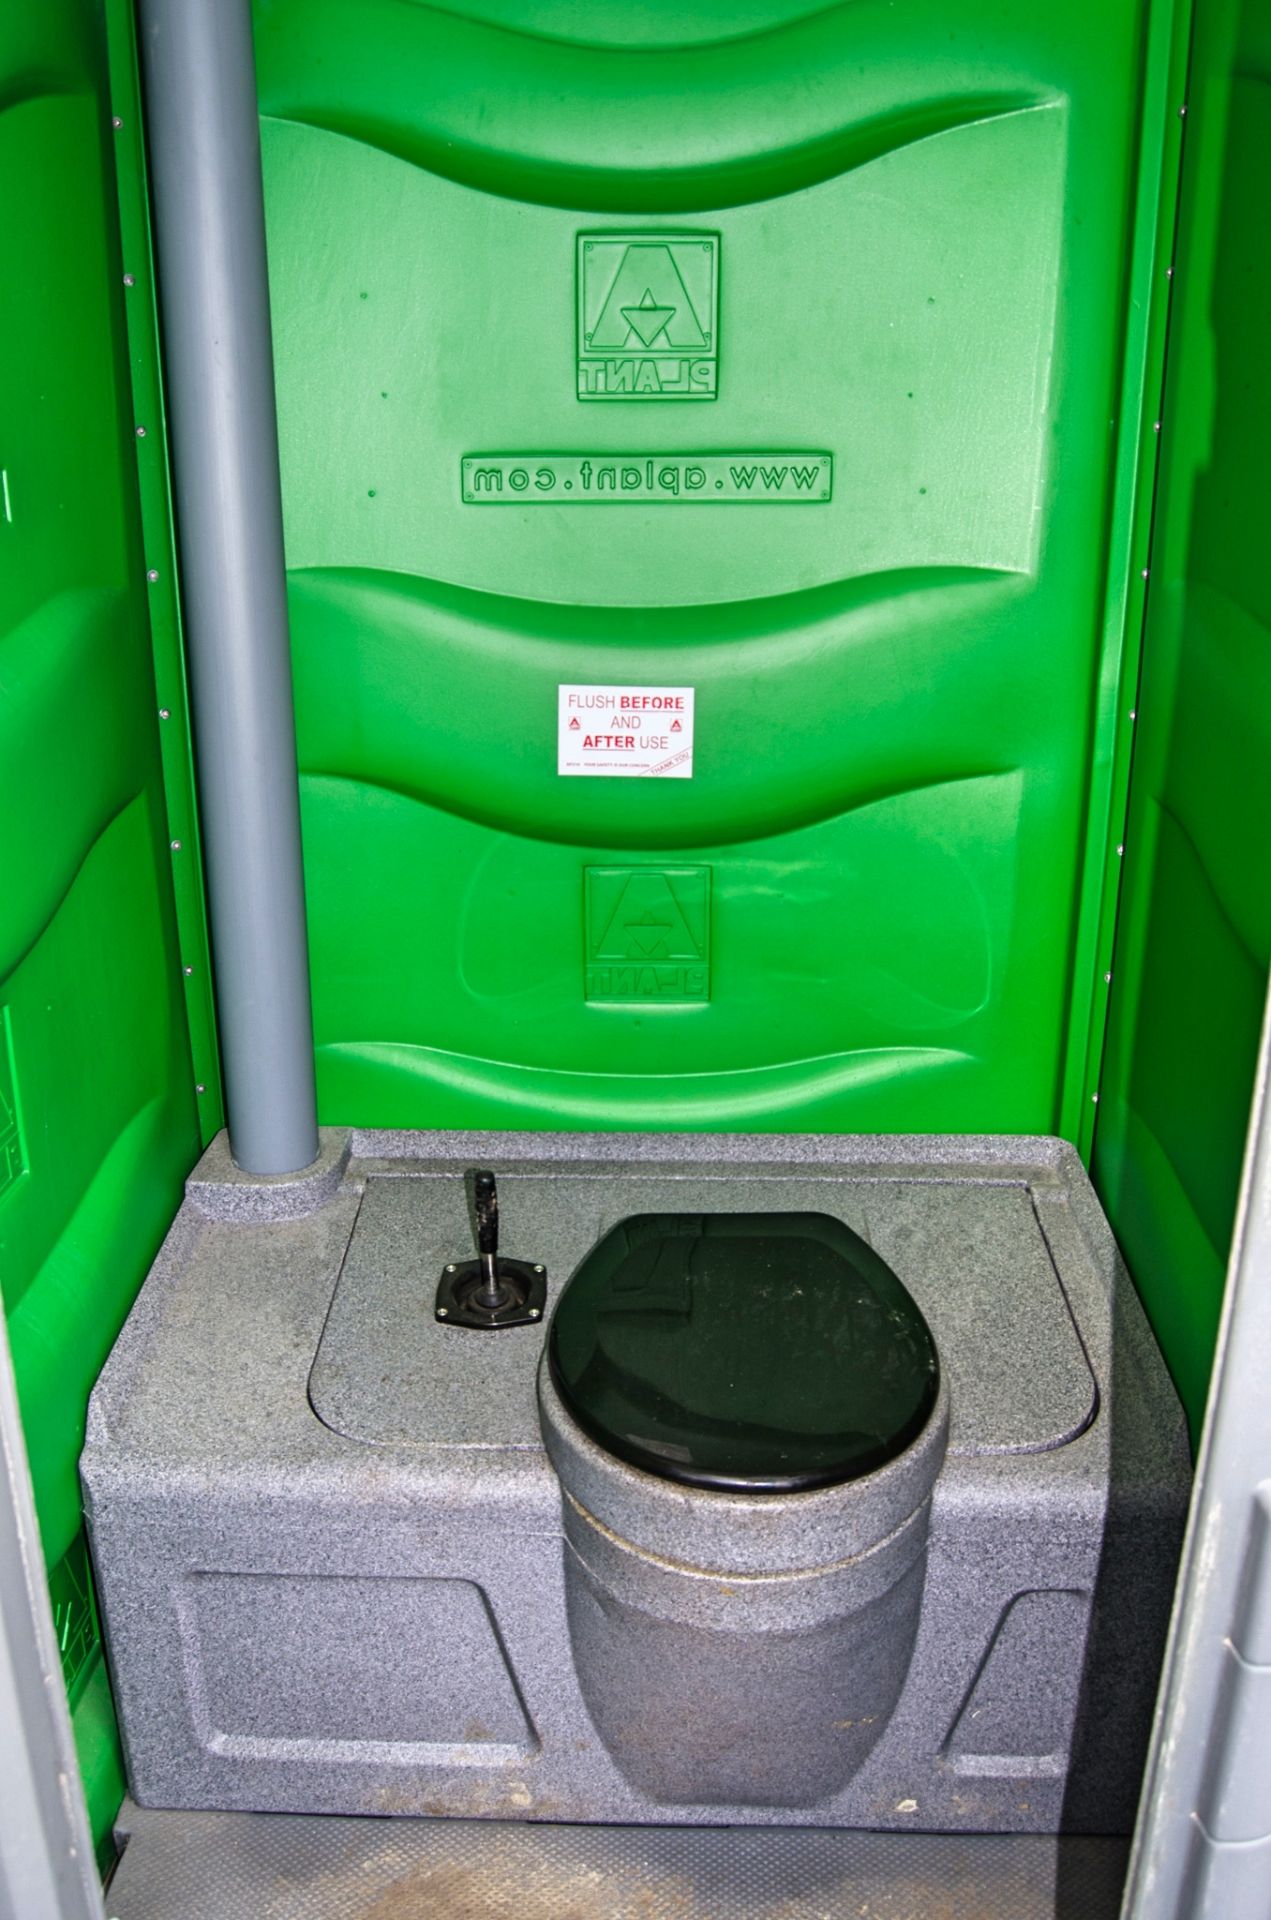 Plastic portable toilet A770019 - Image 3 of 3